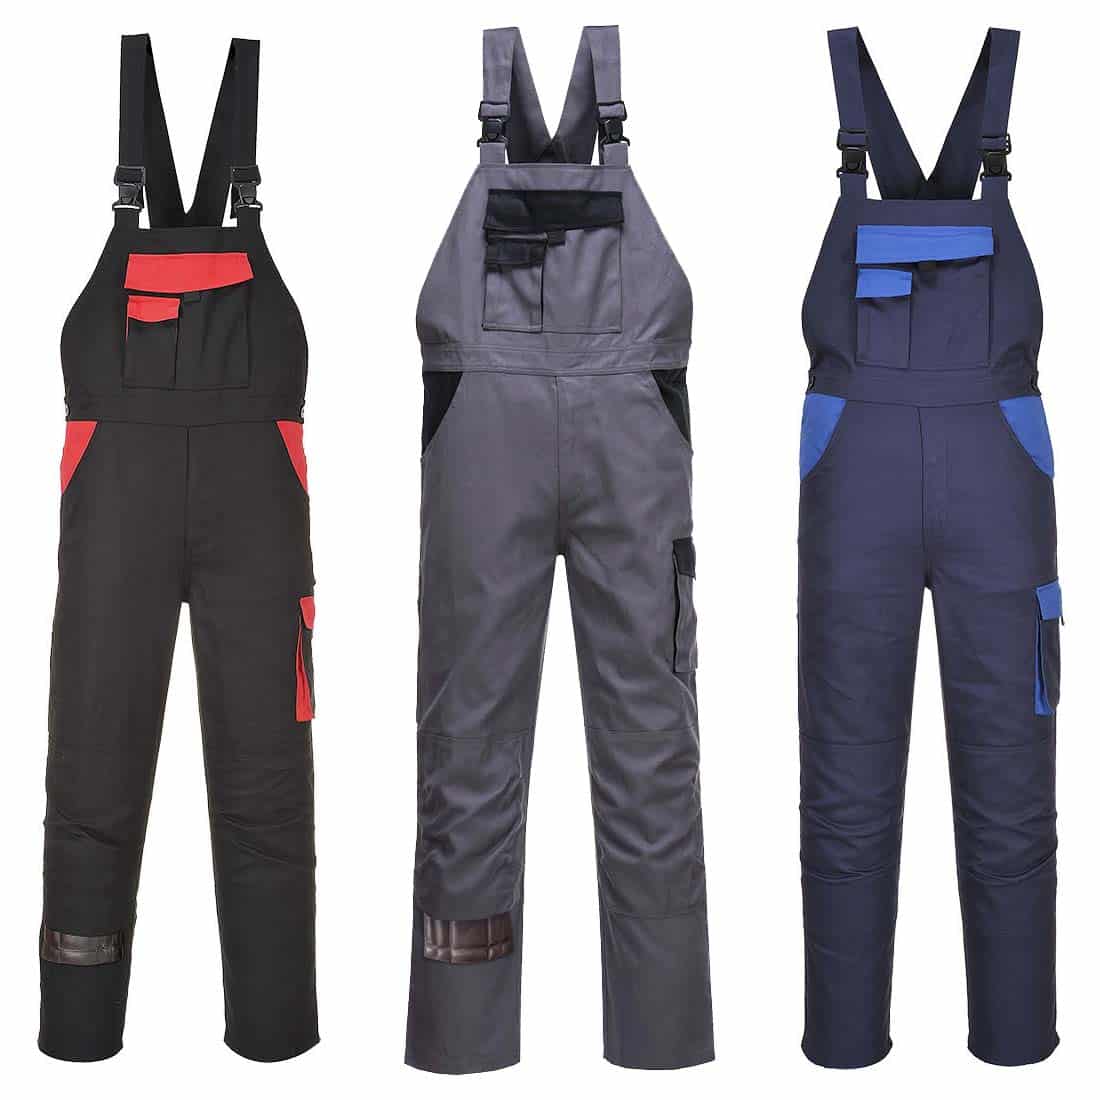 Portwest Texo Contrast Bib And Brace Lined Work Wear Overall Trouser TX17 